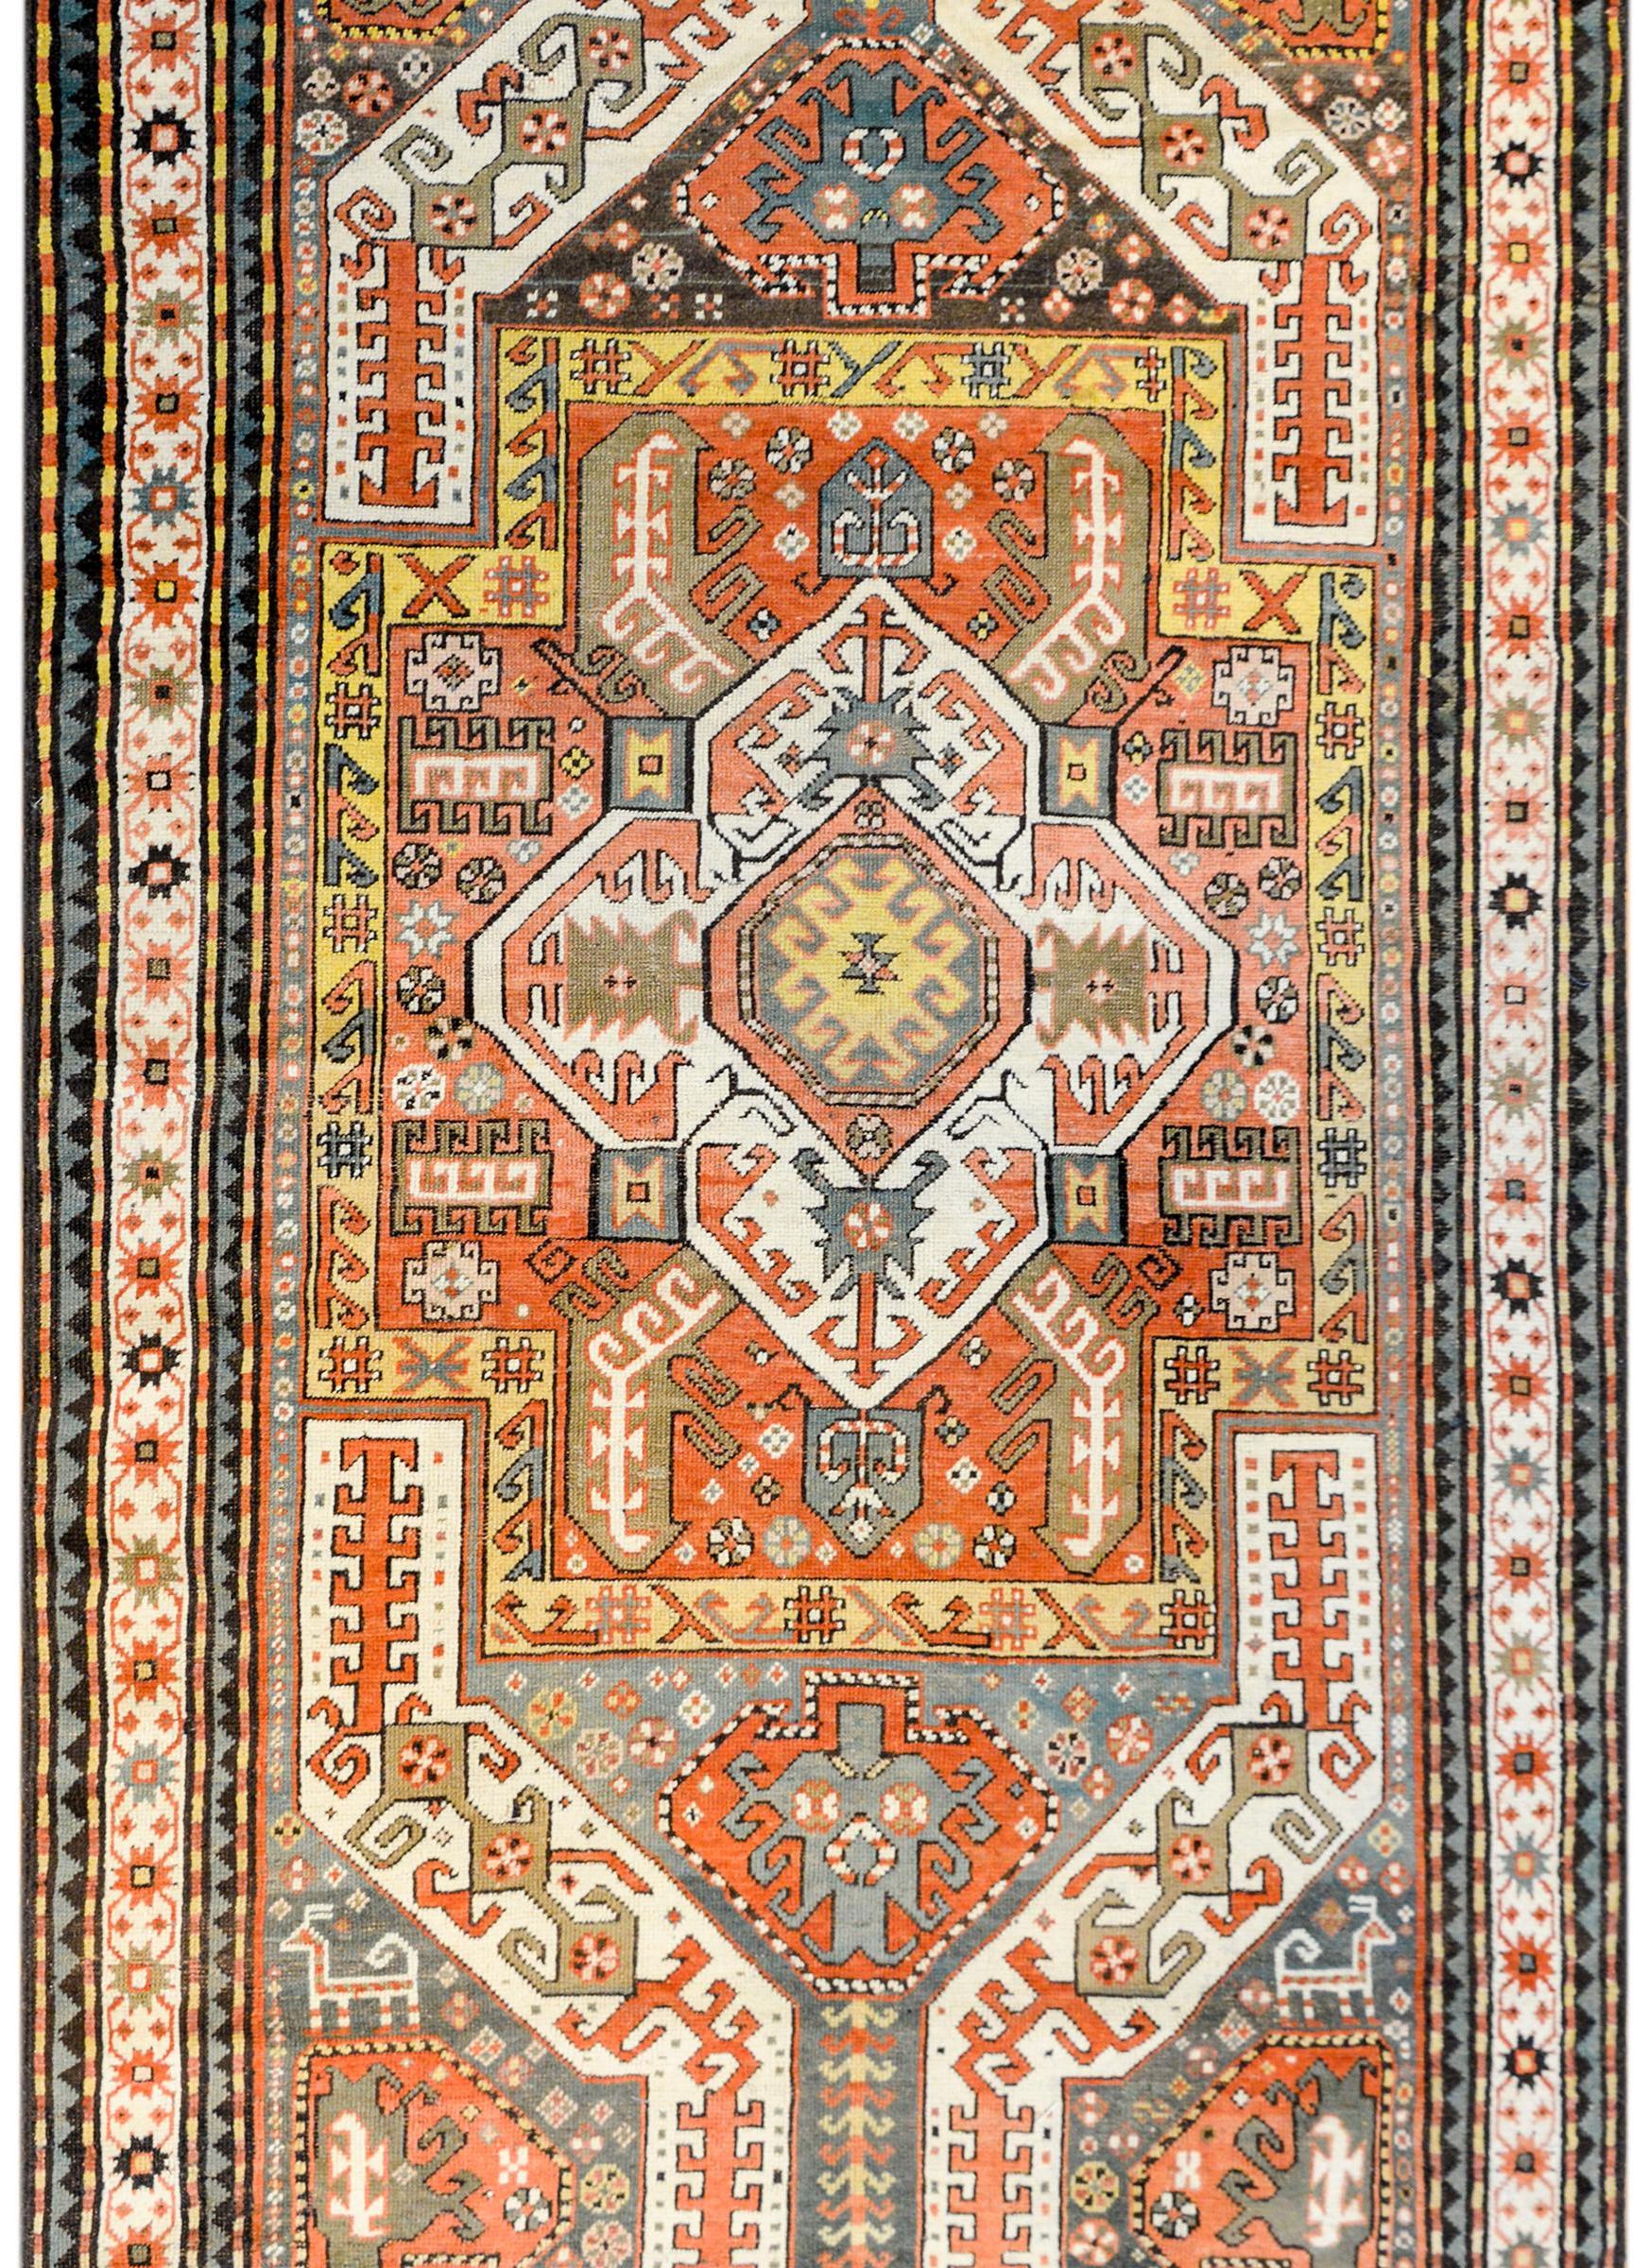 An extraordinary early 20th century Azerbaijani Kazak rug of unusual color woven in beautiful crimson, gold, green, and pale indigo vegetable dyed wool colors. The pattern contains a large central diamond medallion with stylized leaves and scrolling